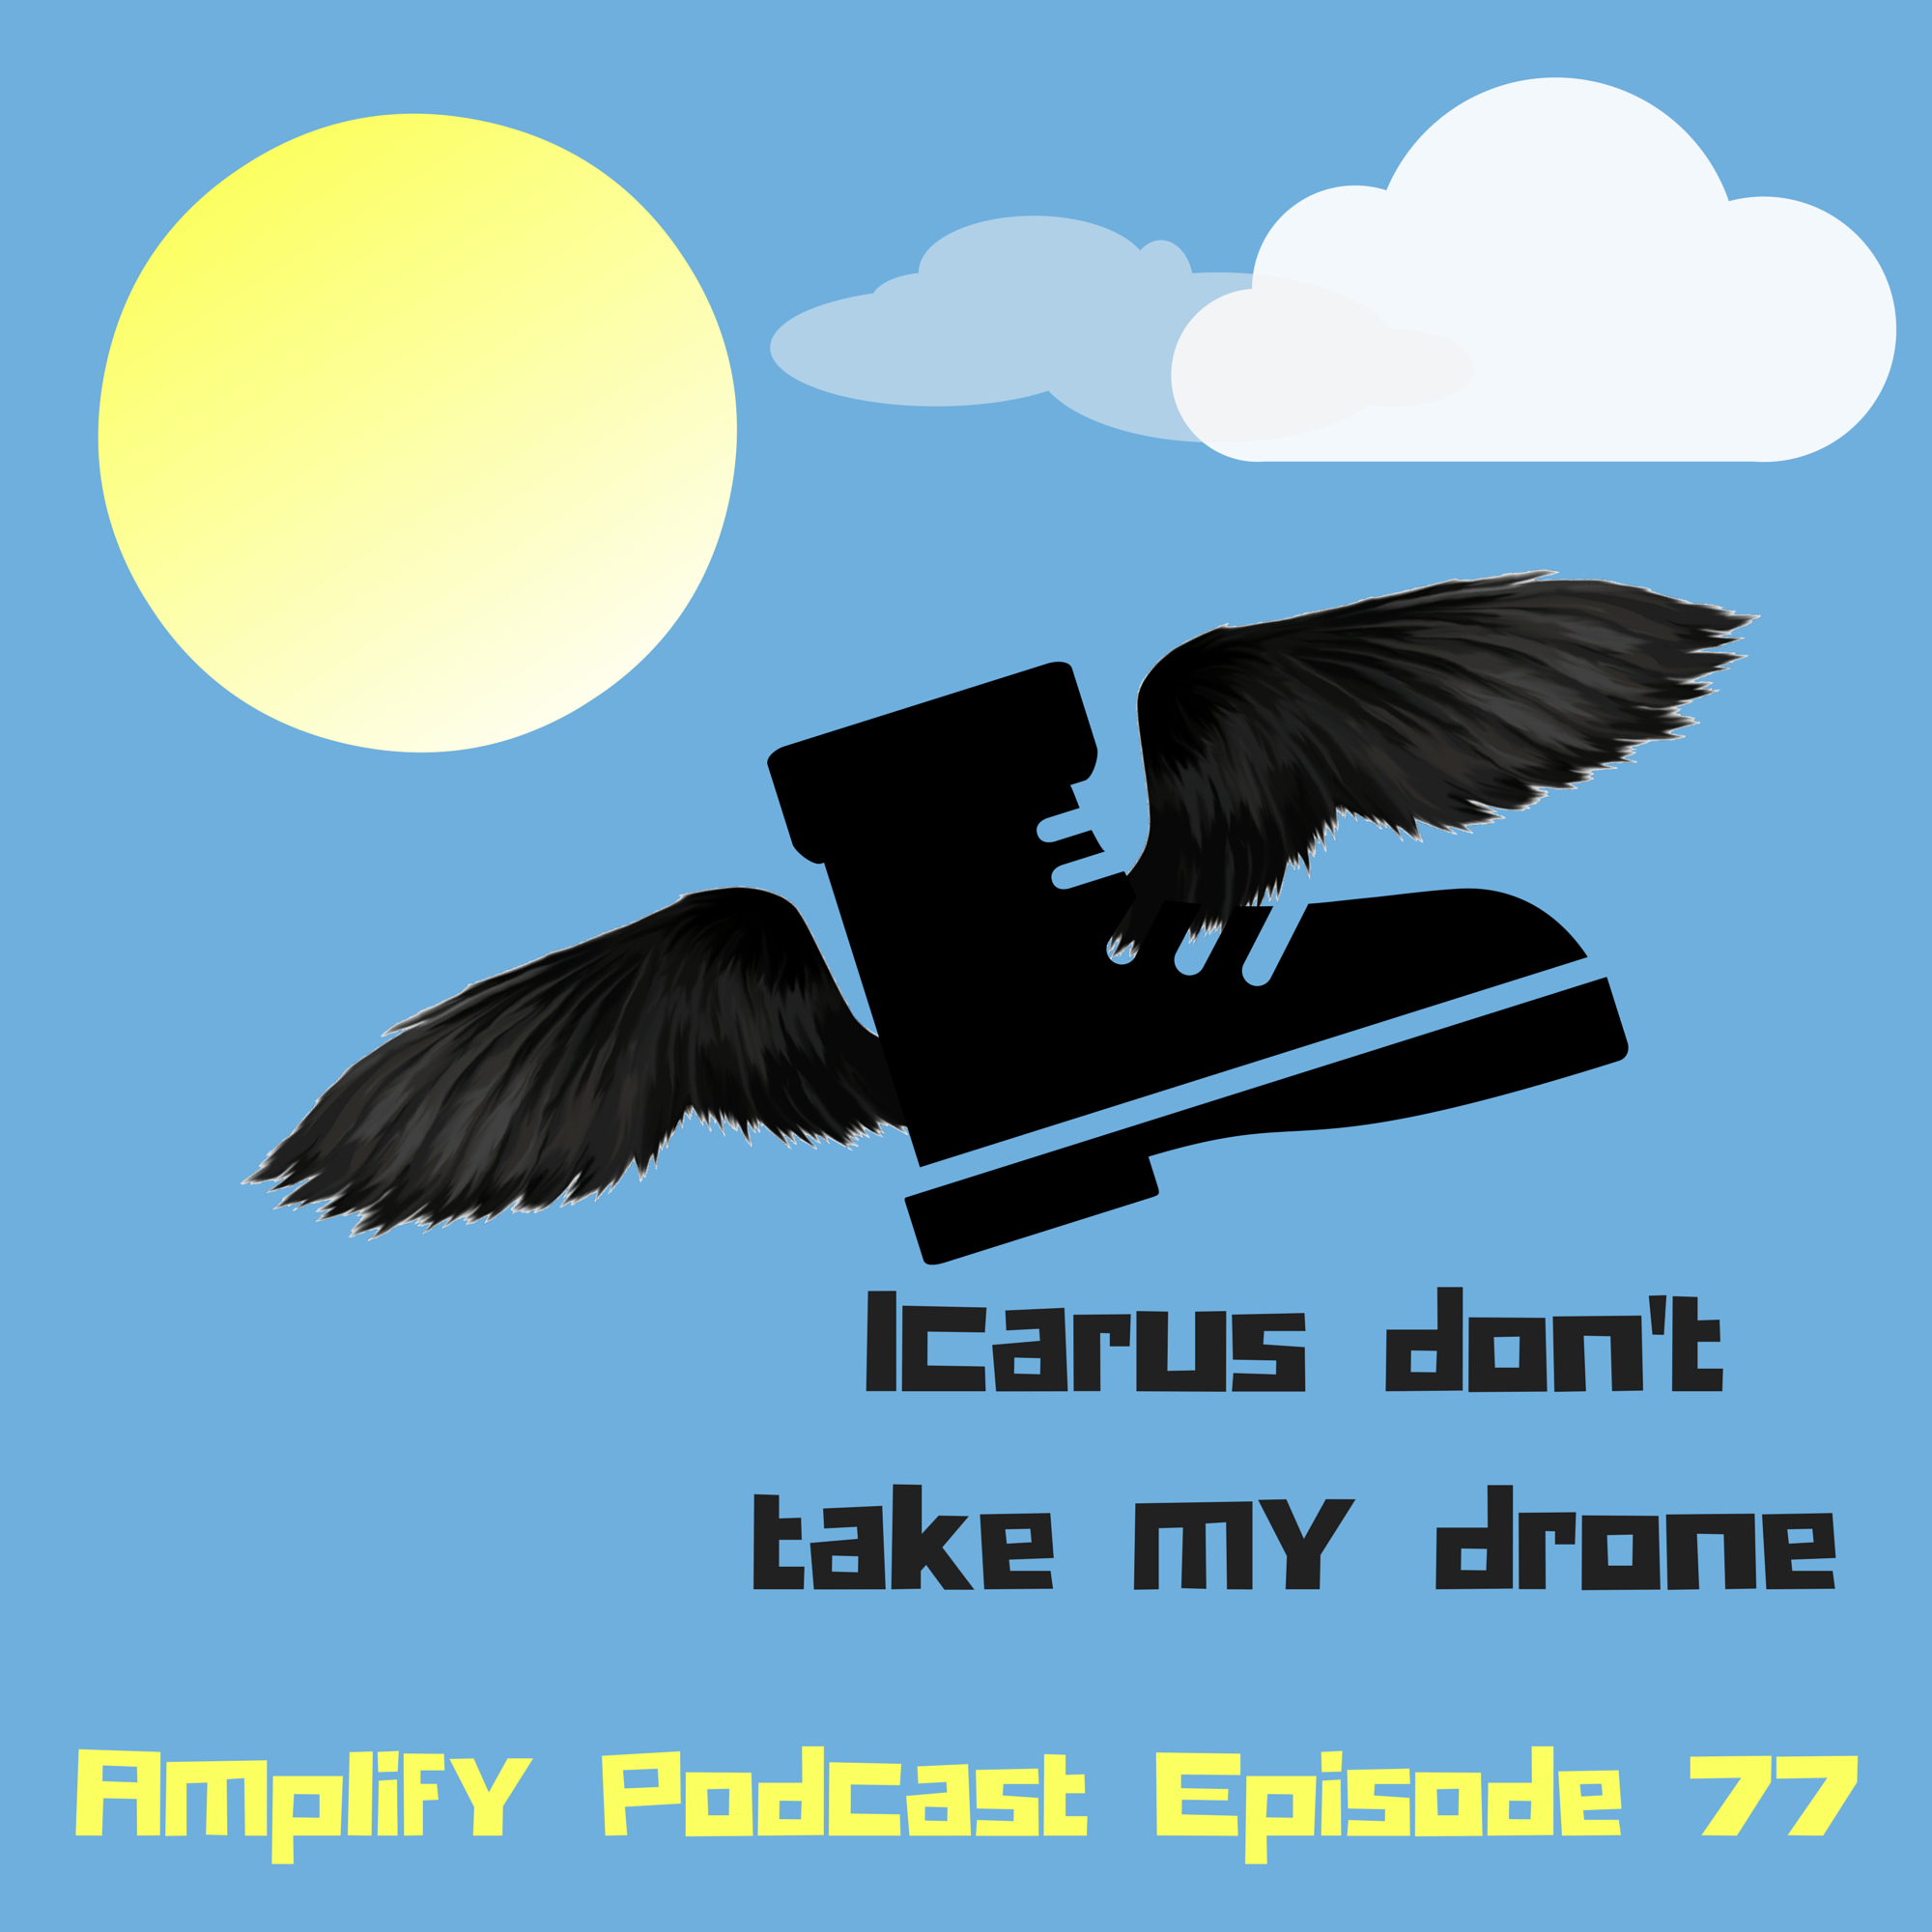 Amplify Podcast Episode 77